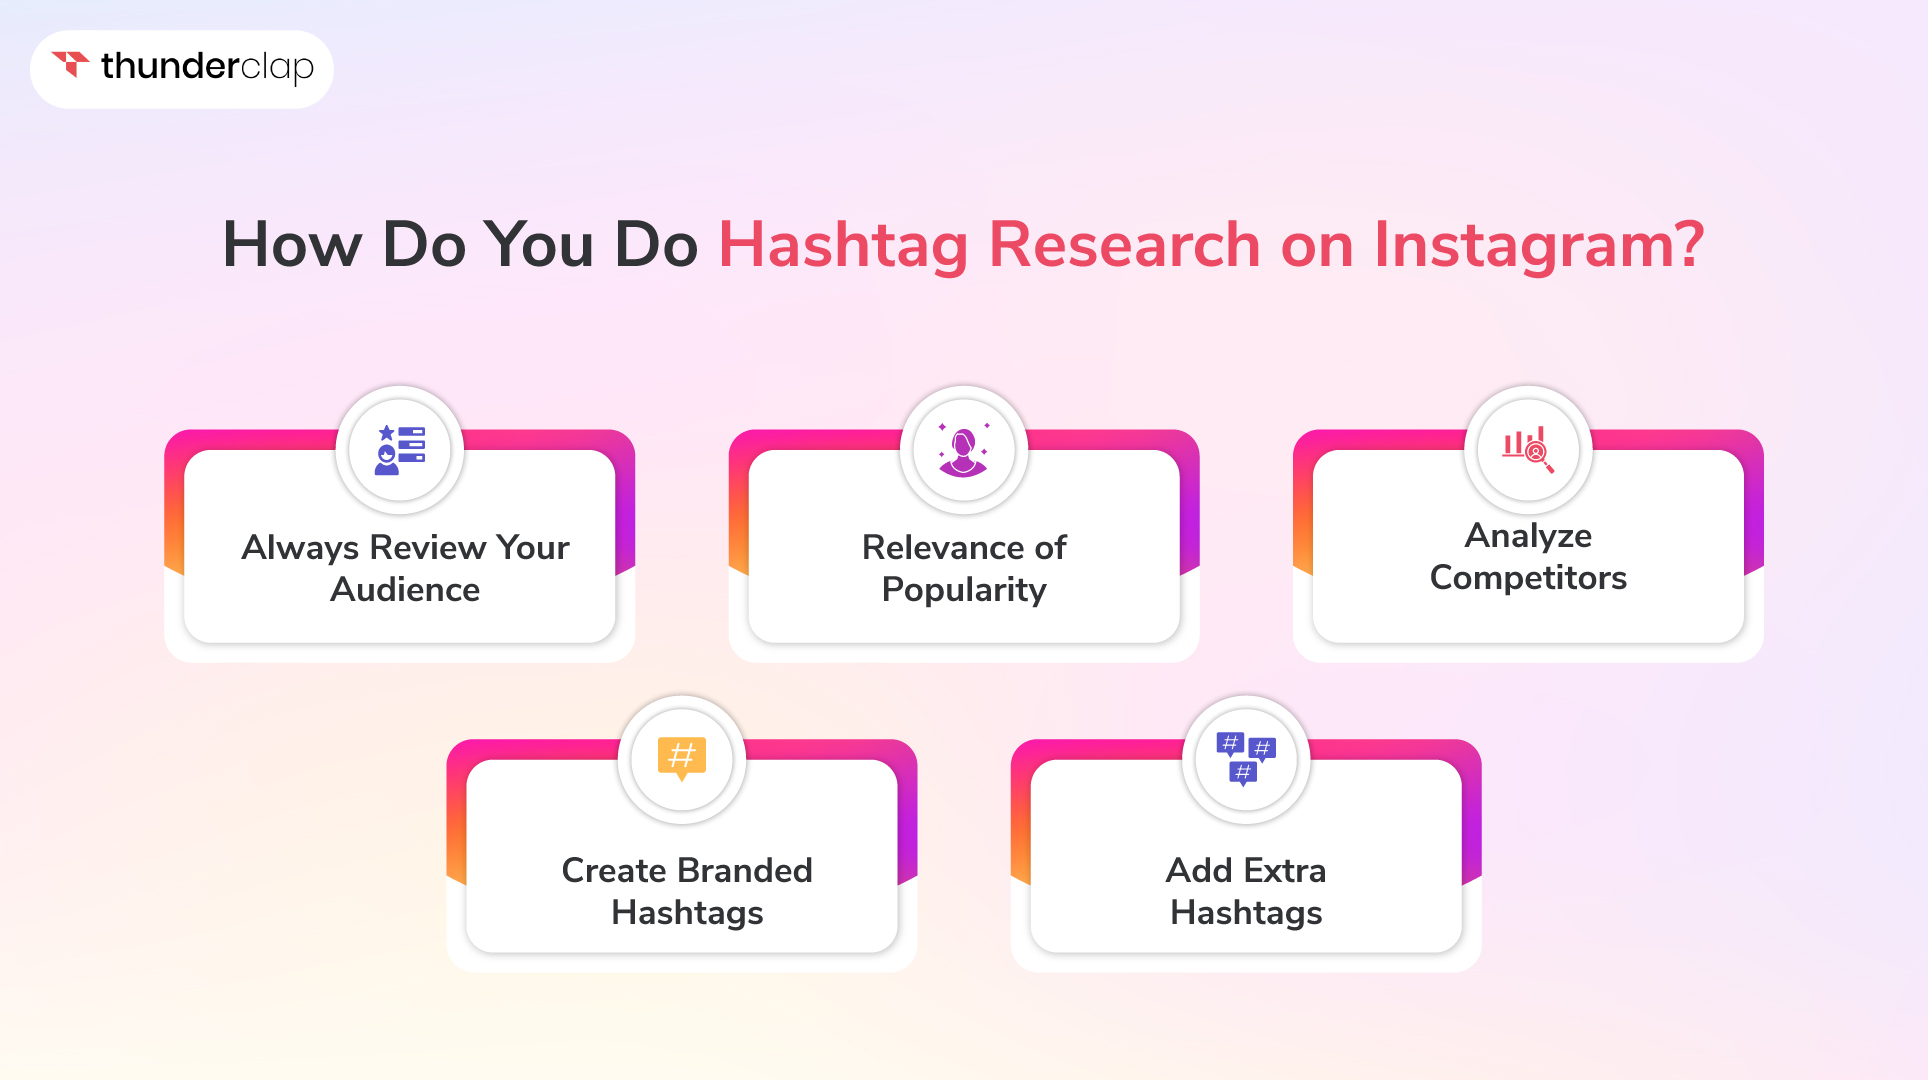 How Do You Do Hashtag Research on Instagram